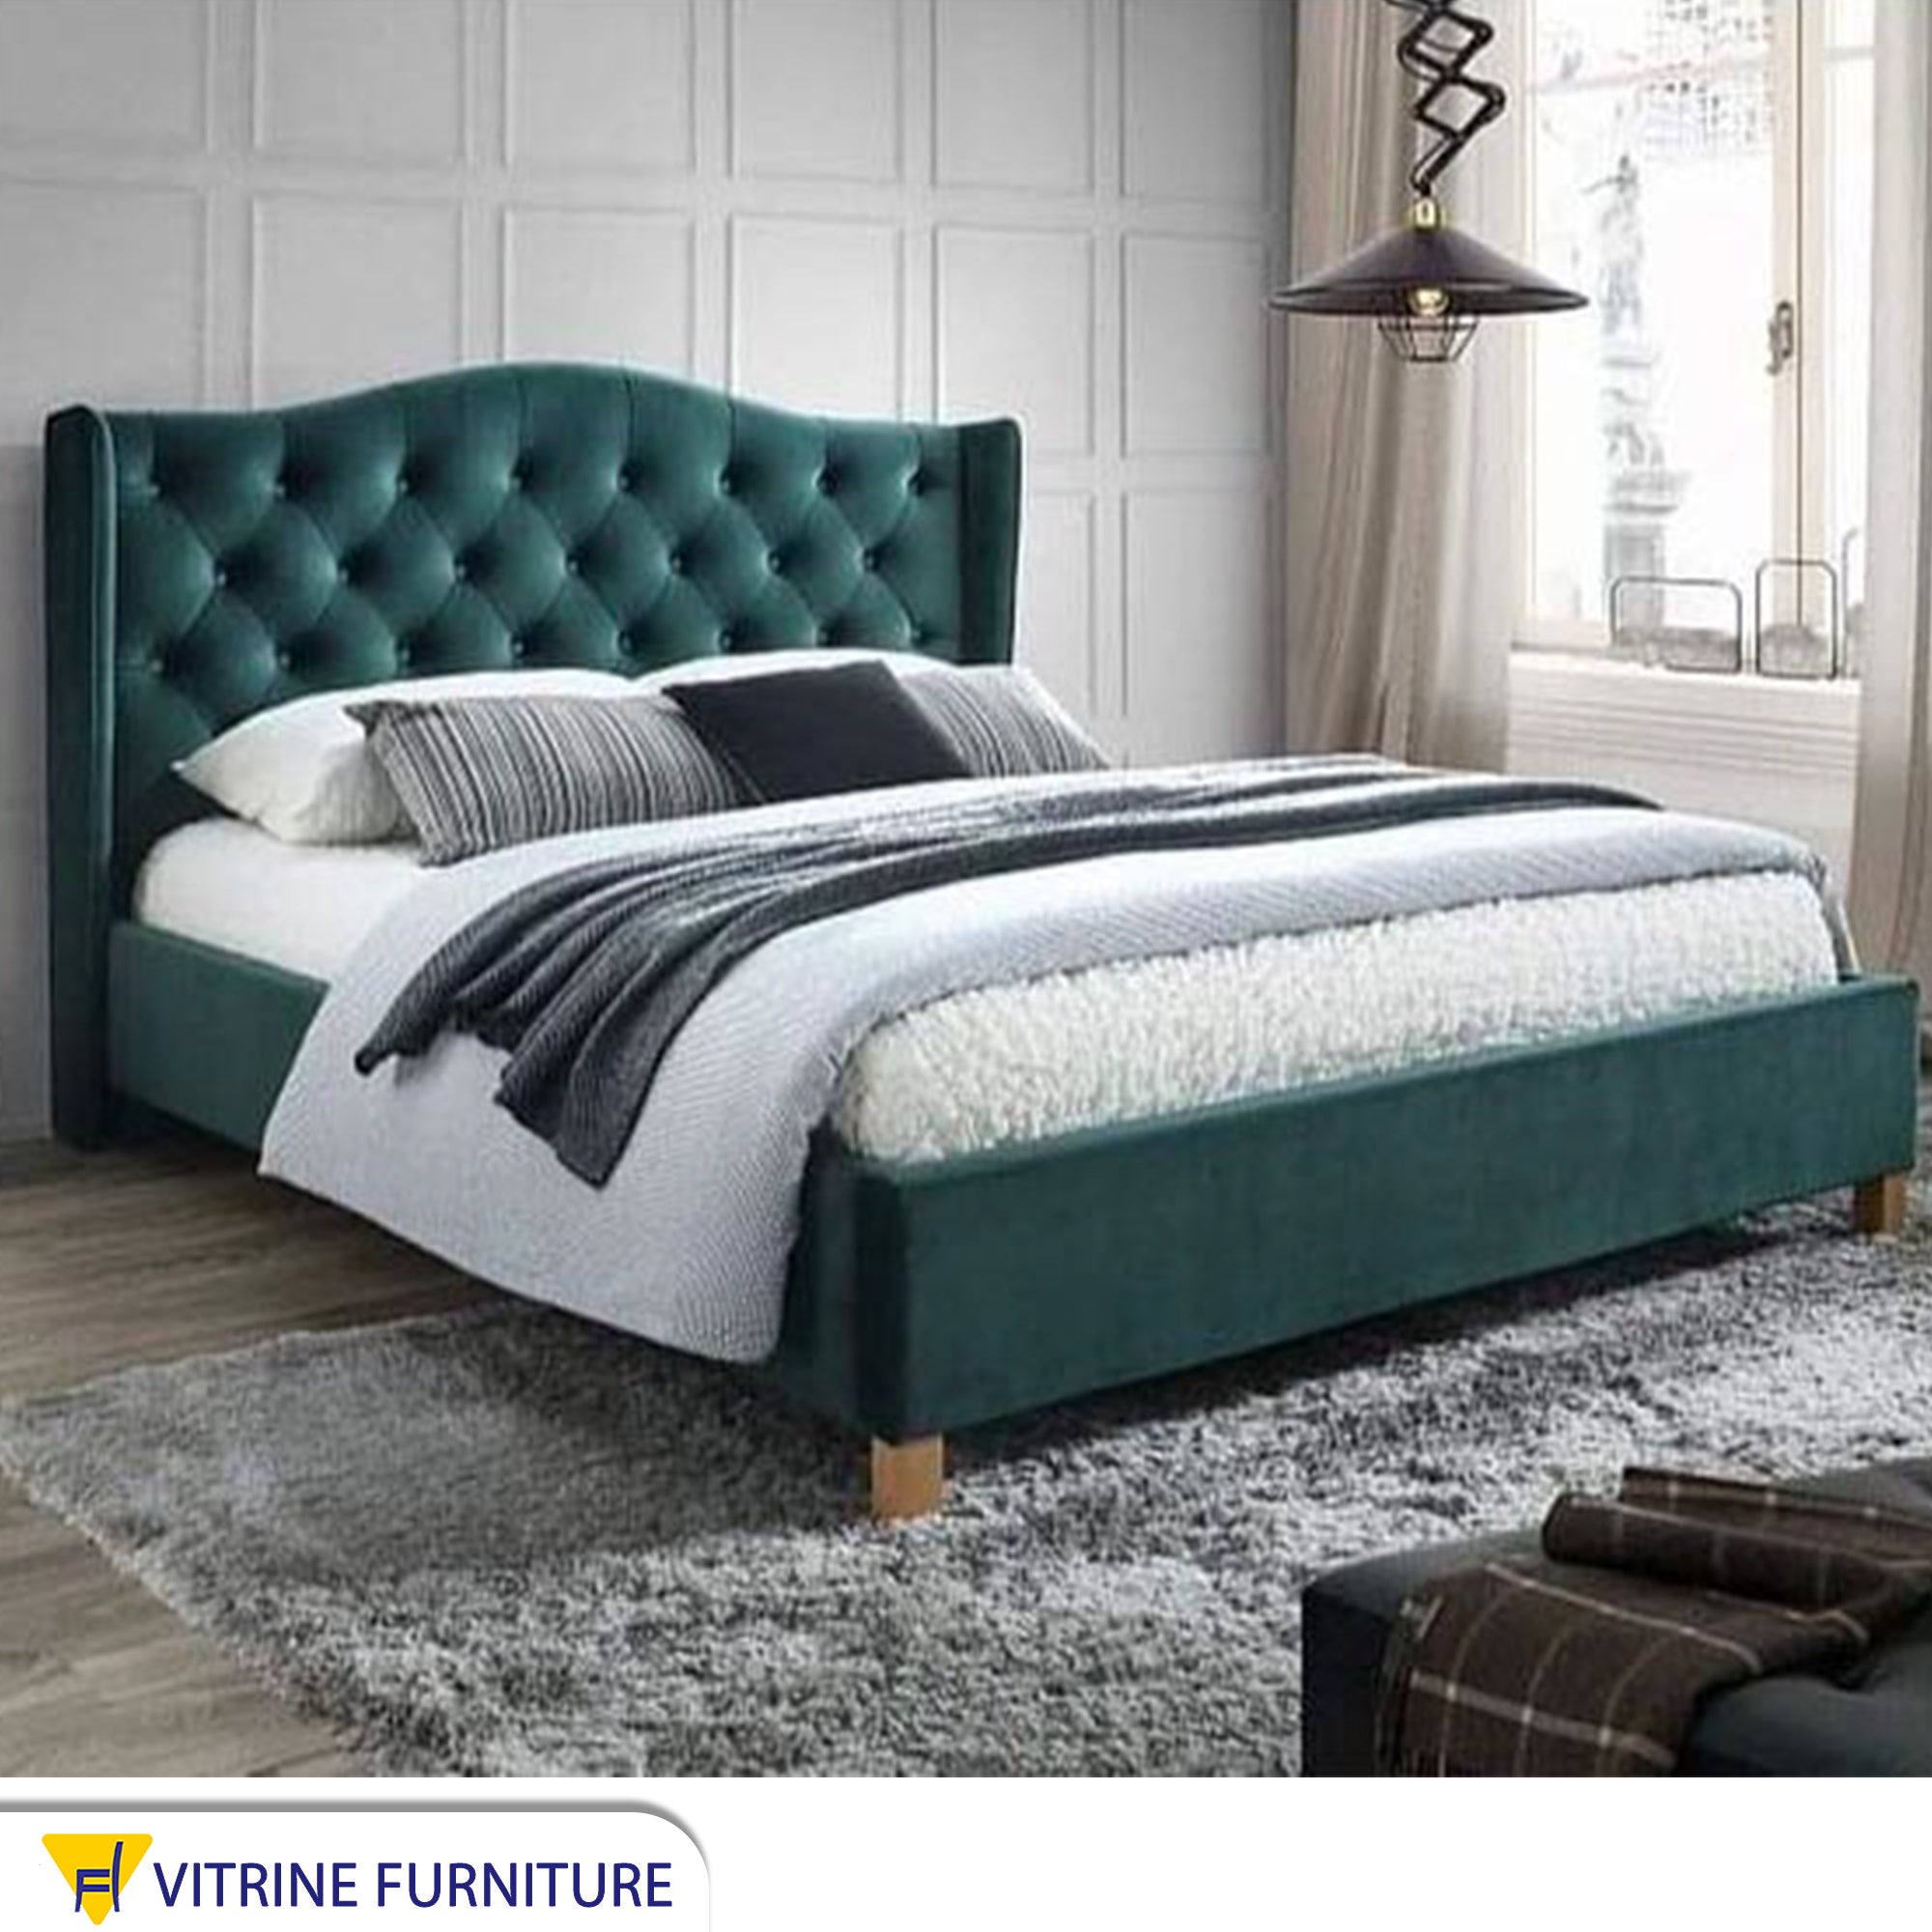 Turquoise bed with Capoutine upholstery